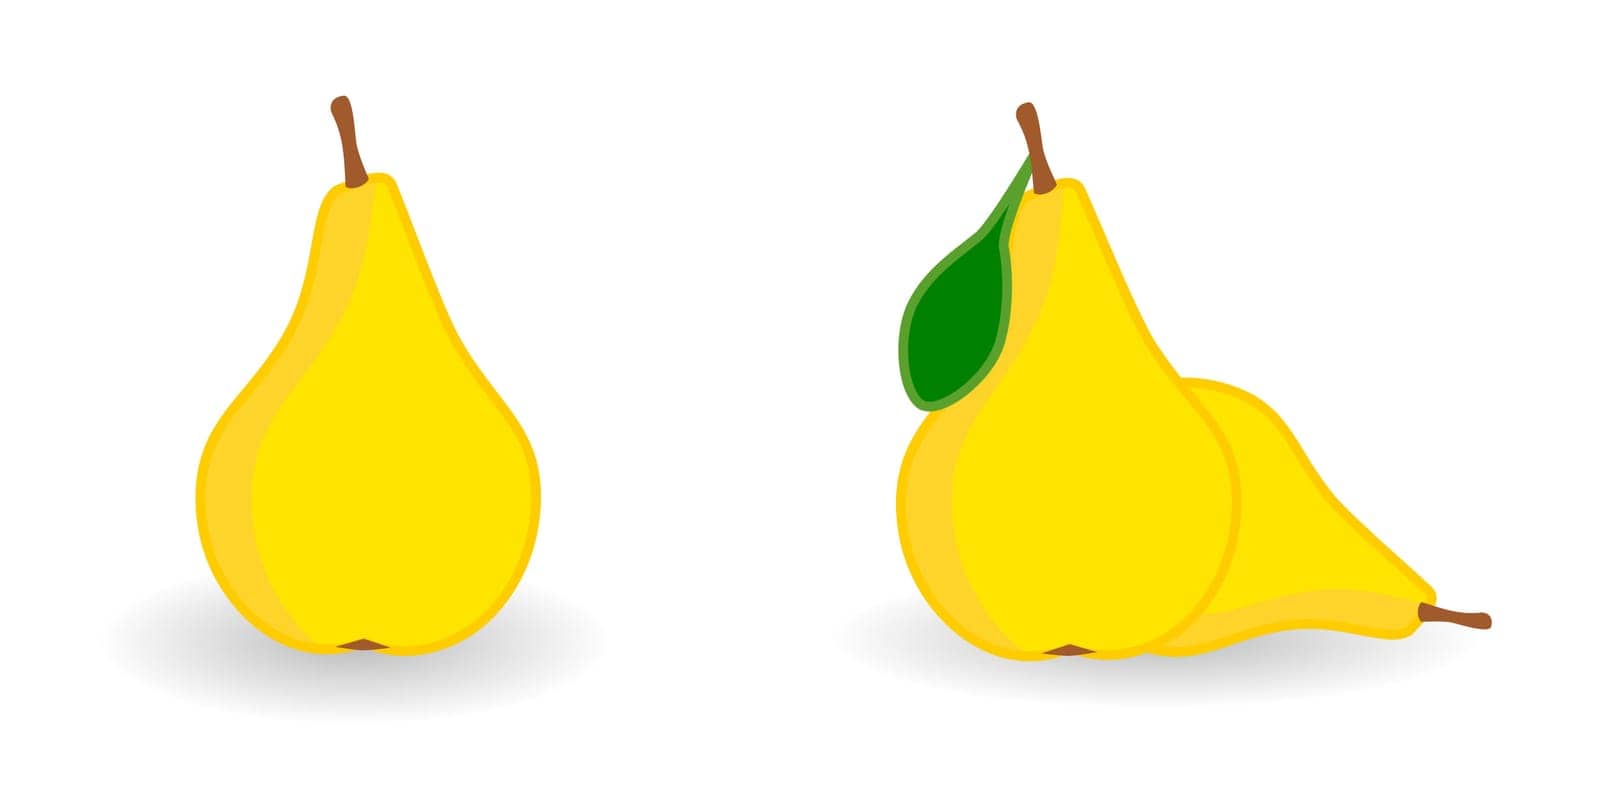 Simple Yellow pear icon, version with single and two fruits.